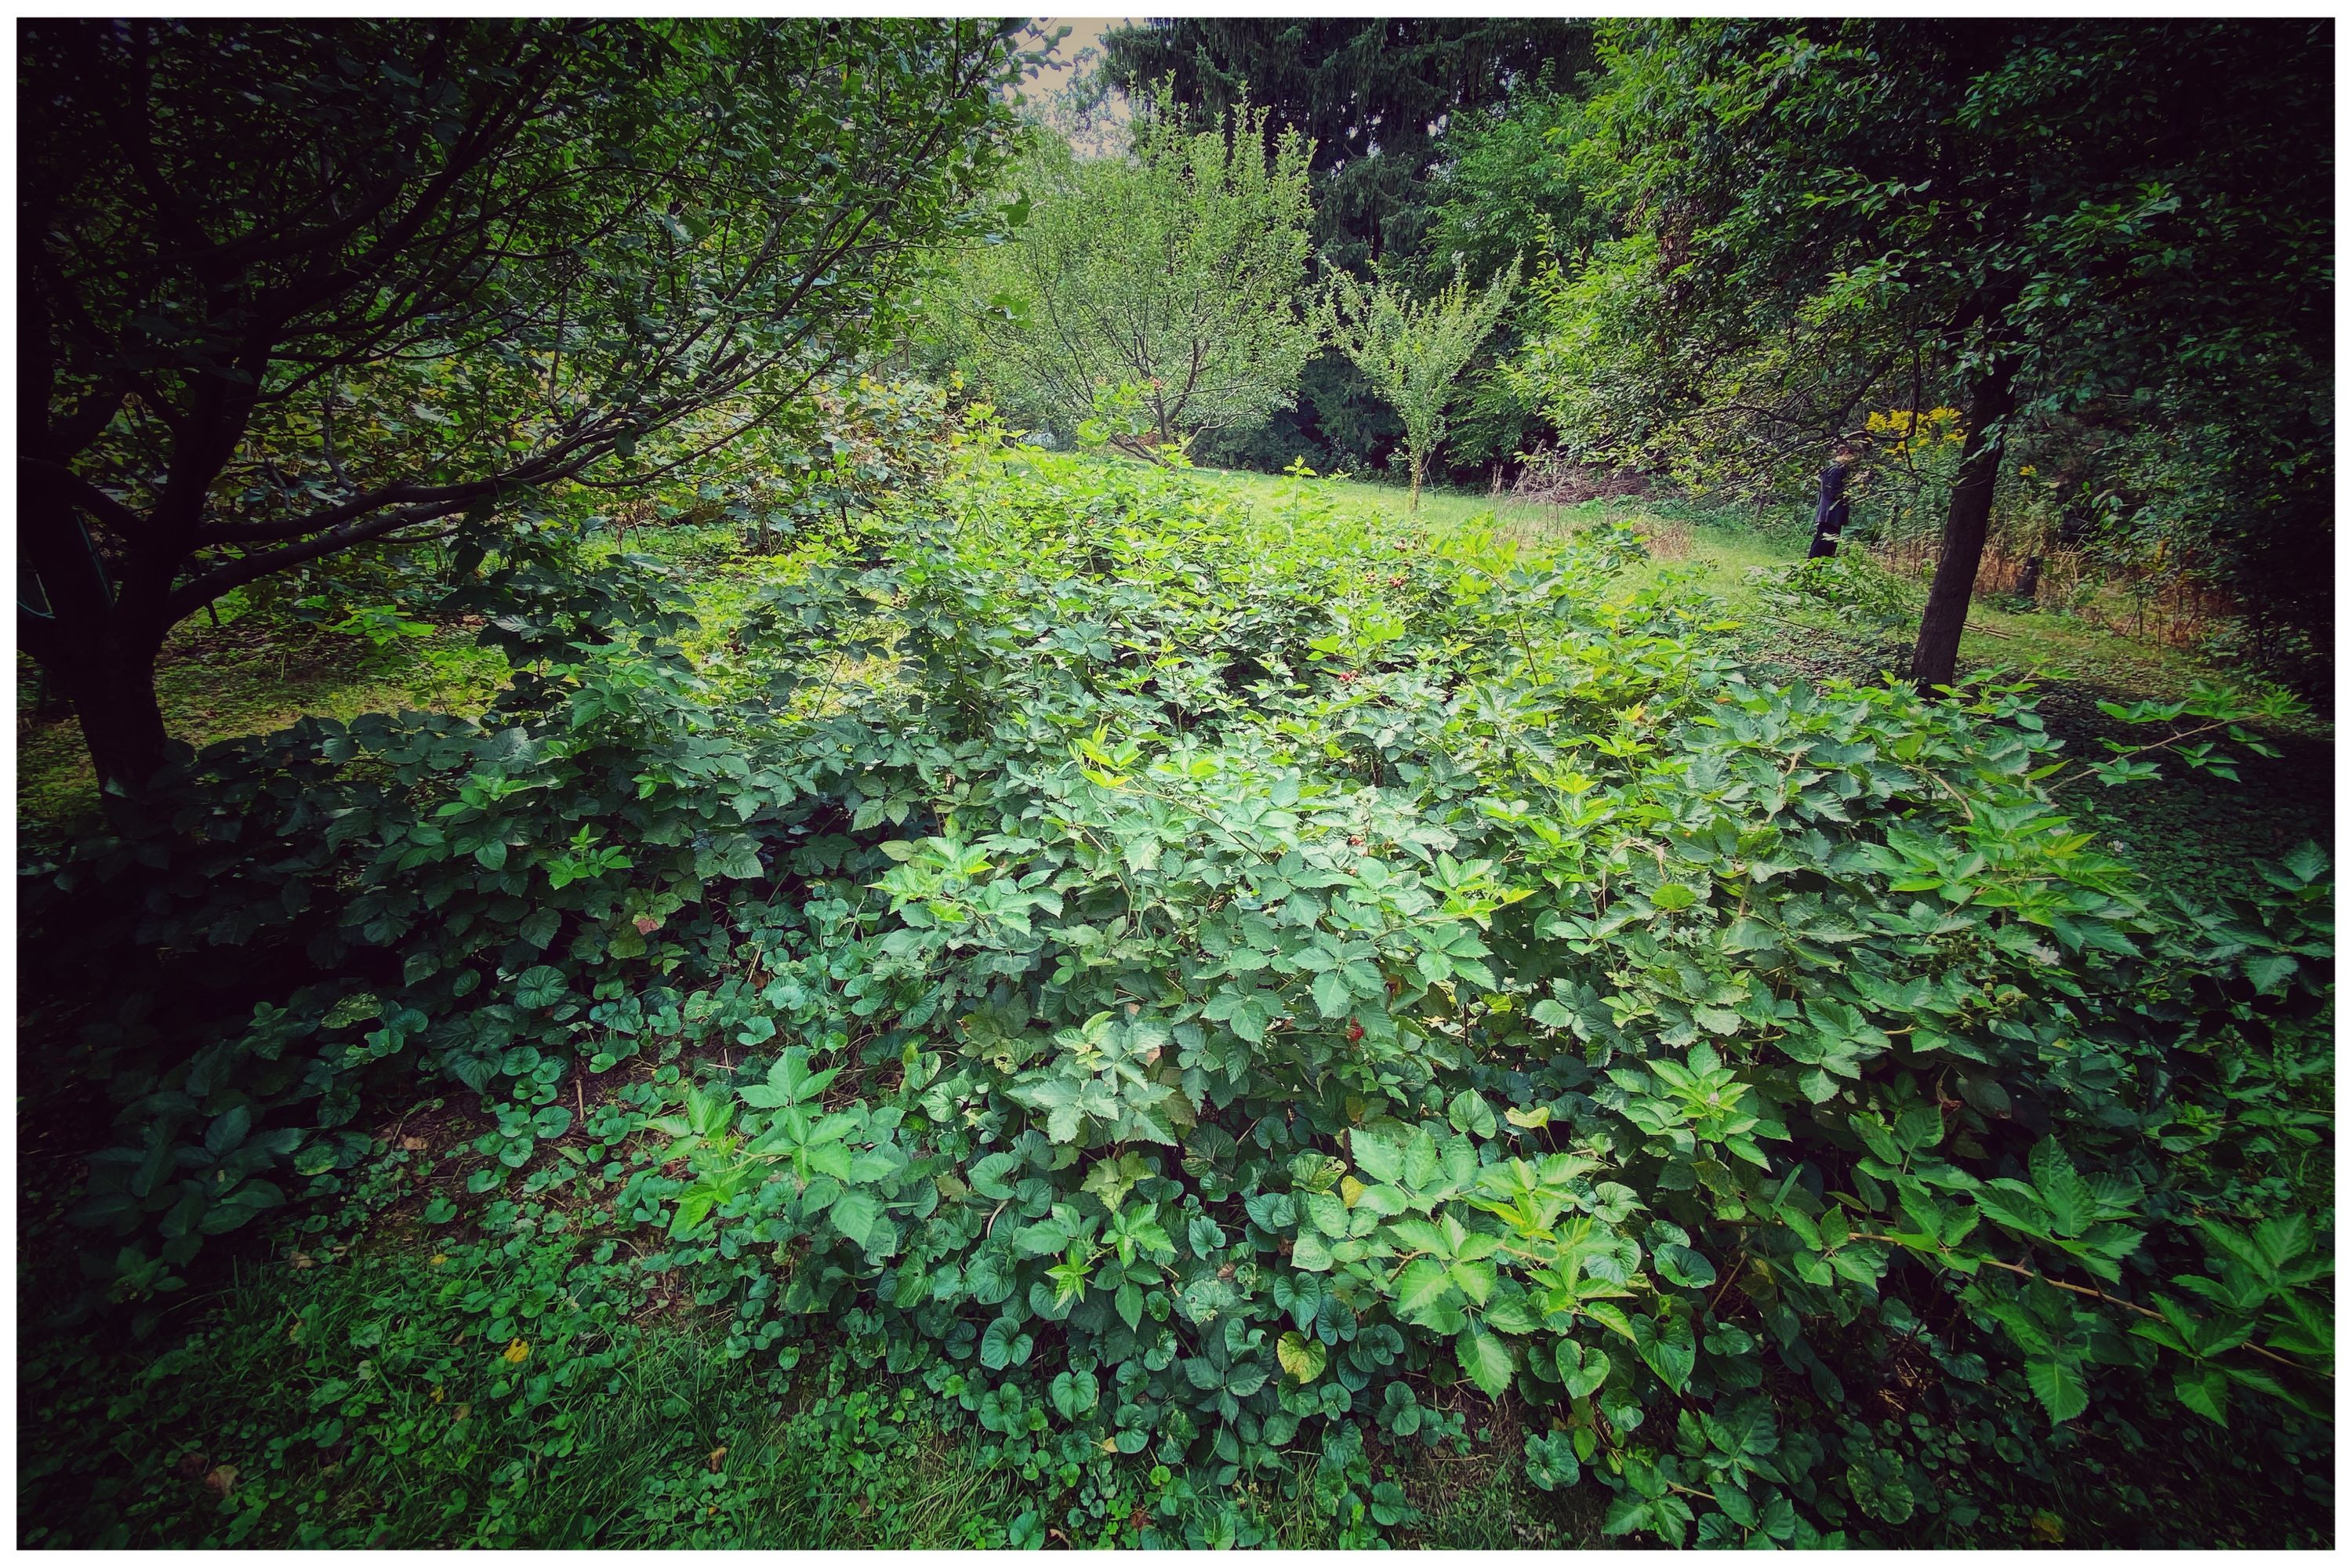 BlackBerry patch which has overrun its boundaries. 15 by 15 feet.